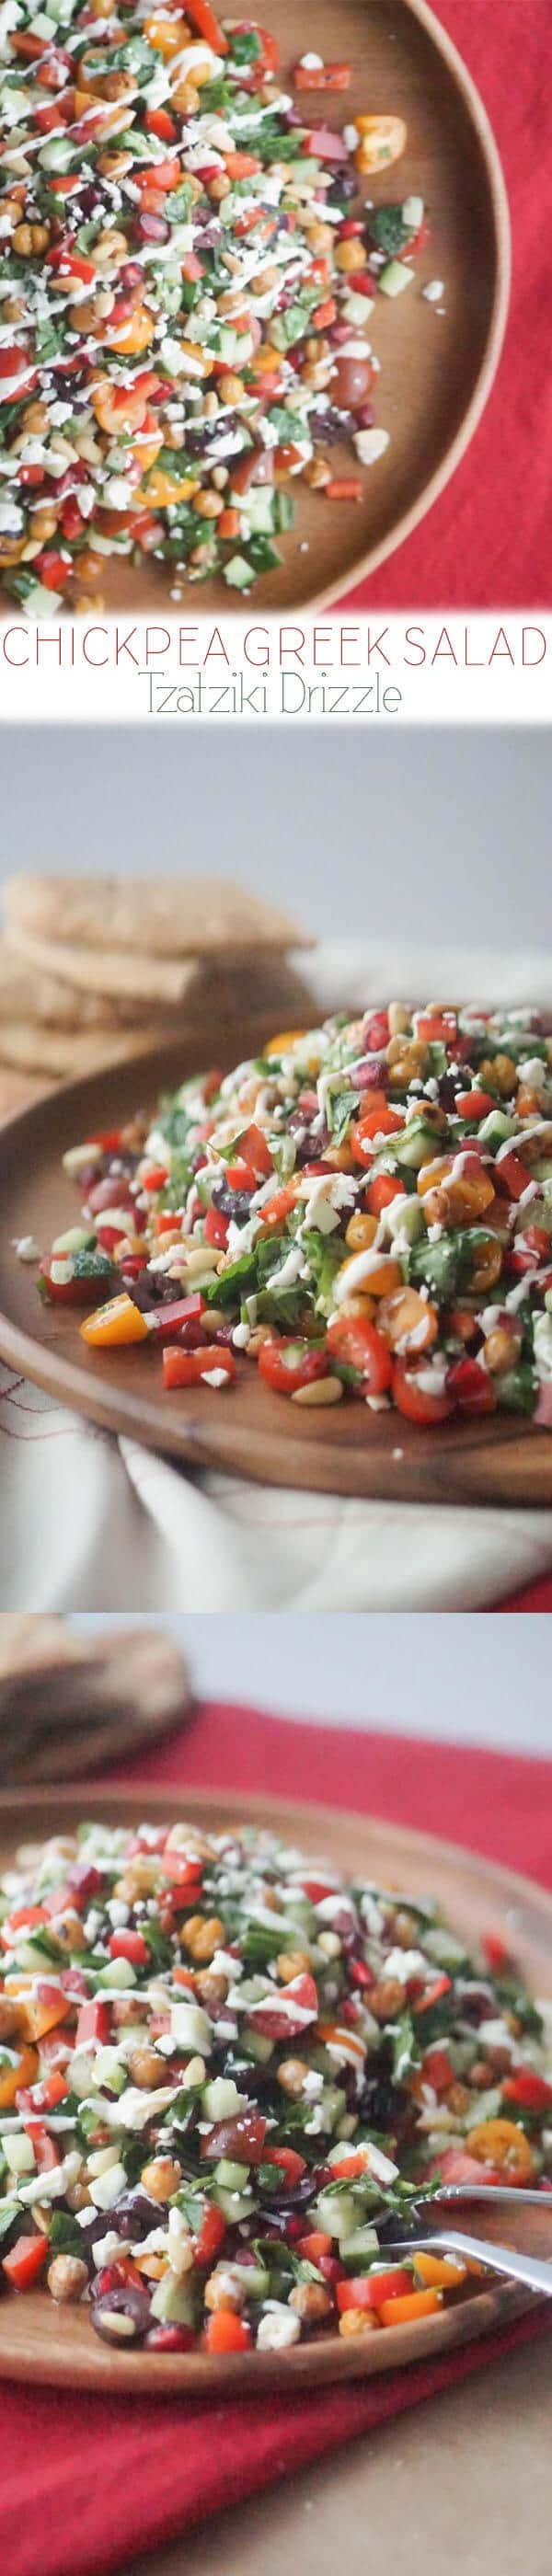 A pinterest image of greek salad on a plate with the overlay text \"Chickpea Greek Salad. Tzatziki Drizzle.\"